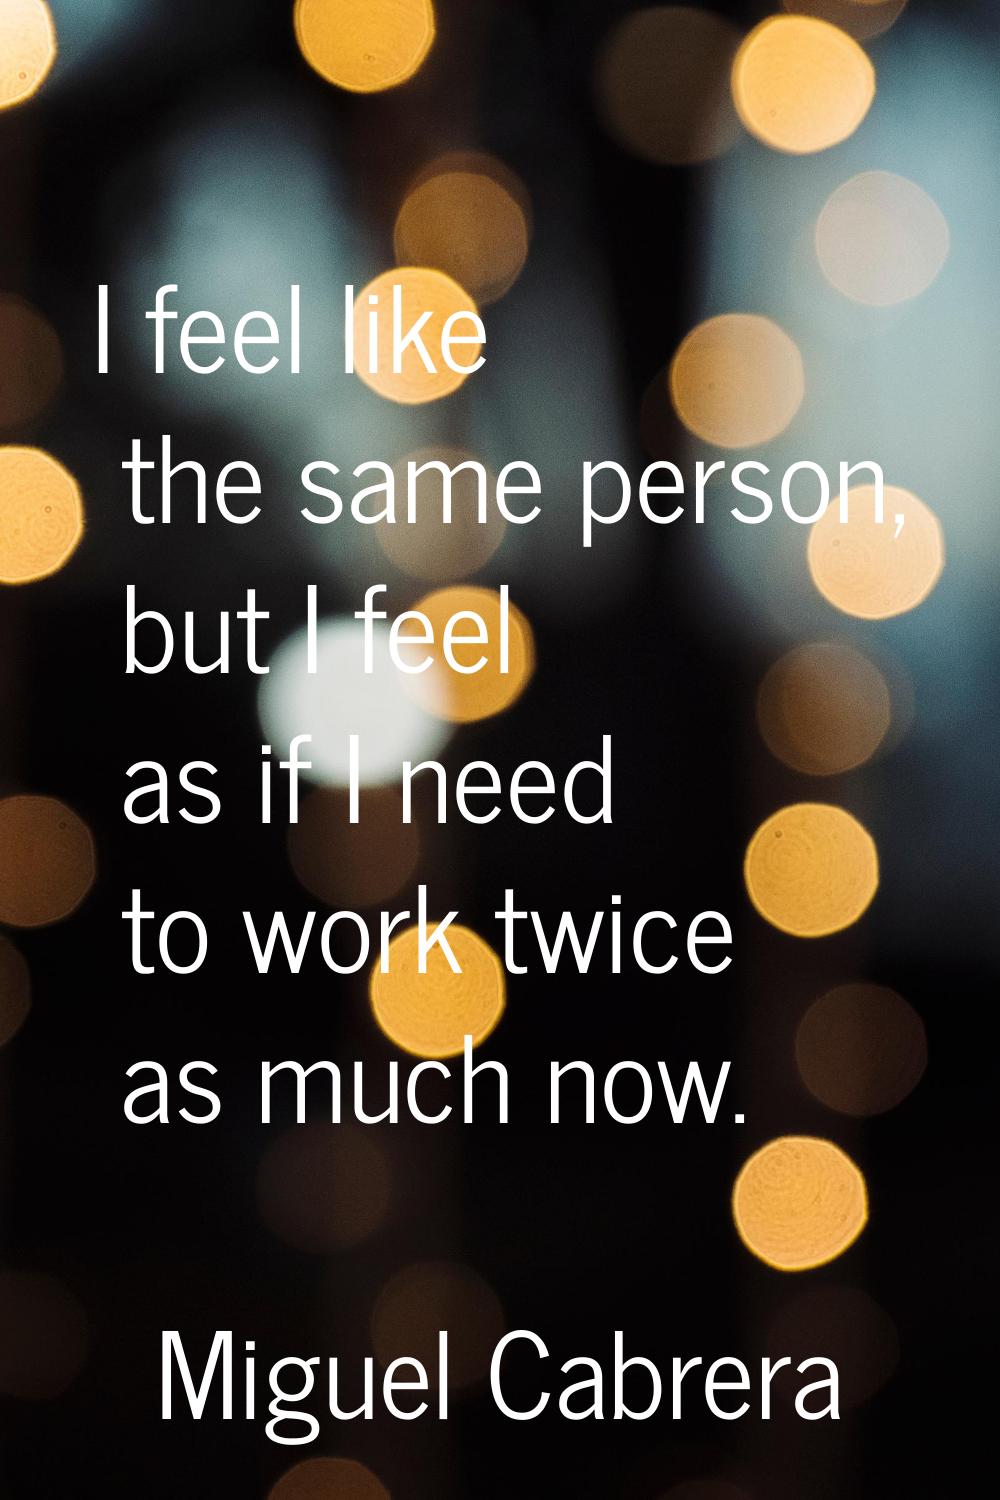 I feel like the same person, but I feel as if I need to work twice as much now.